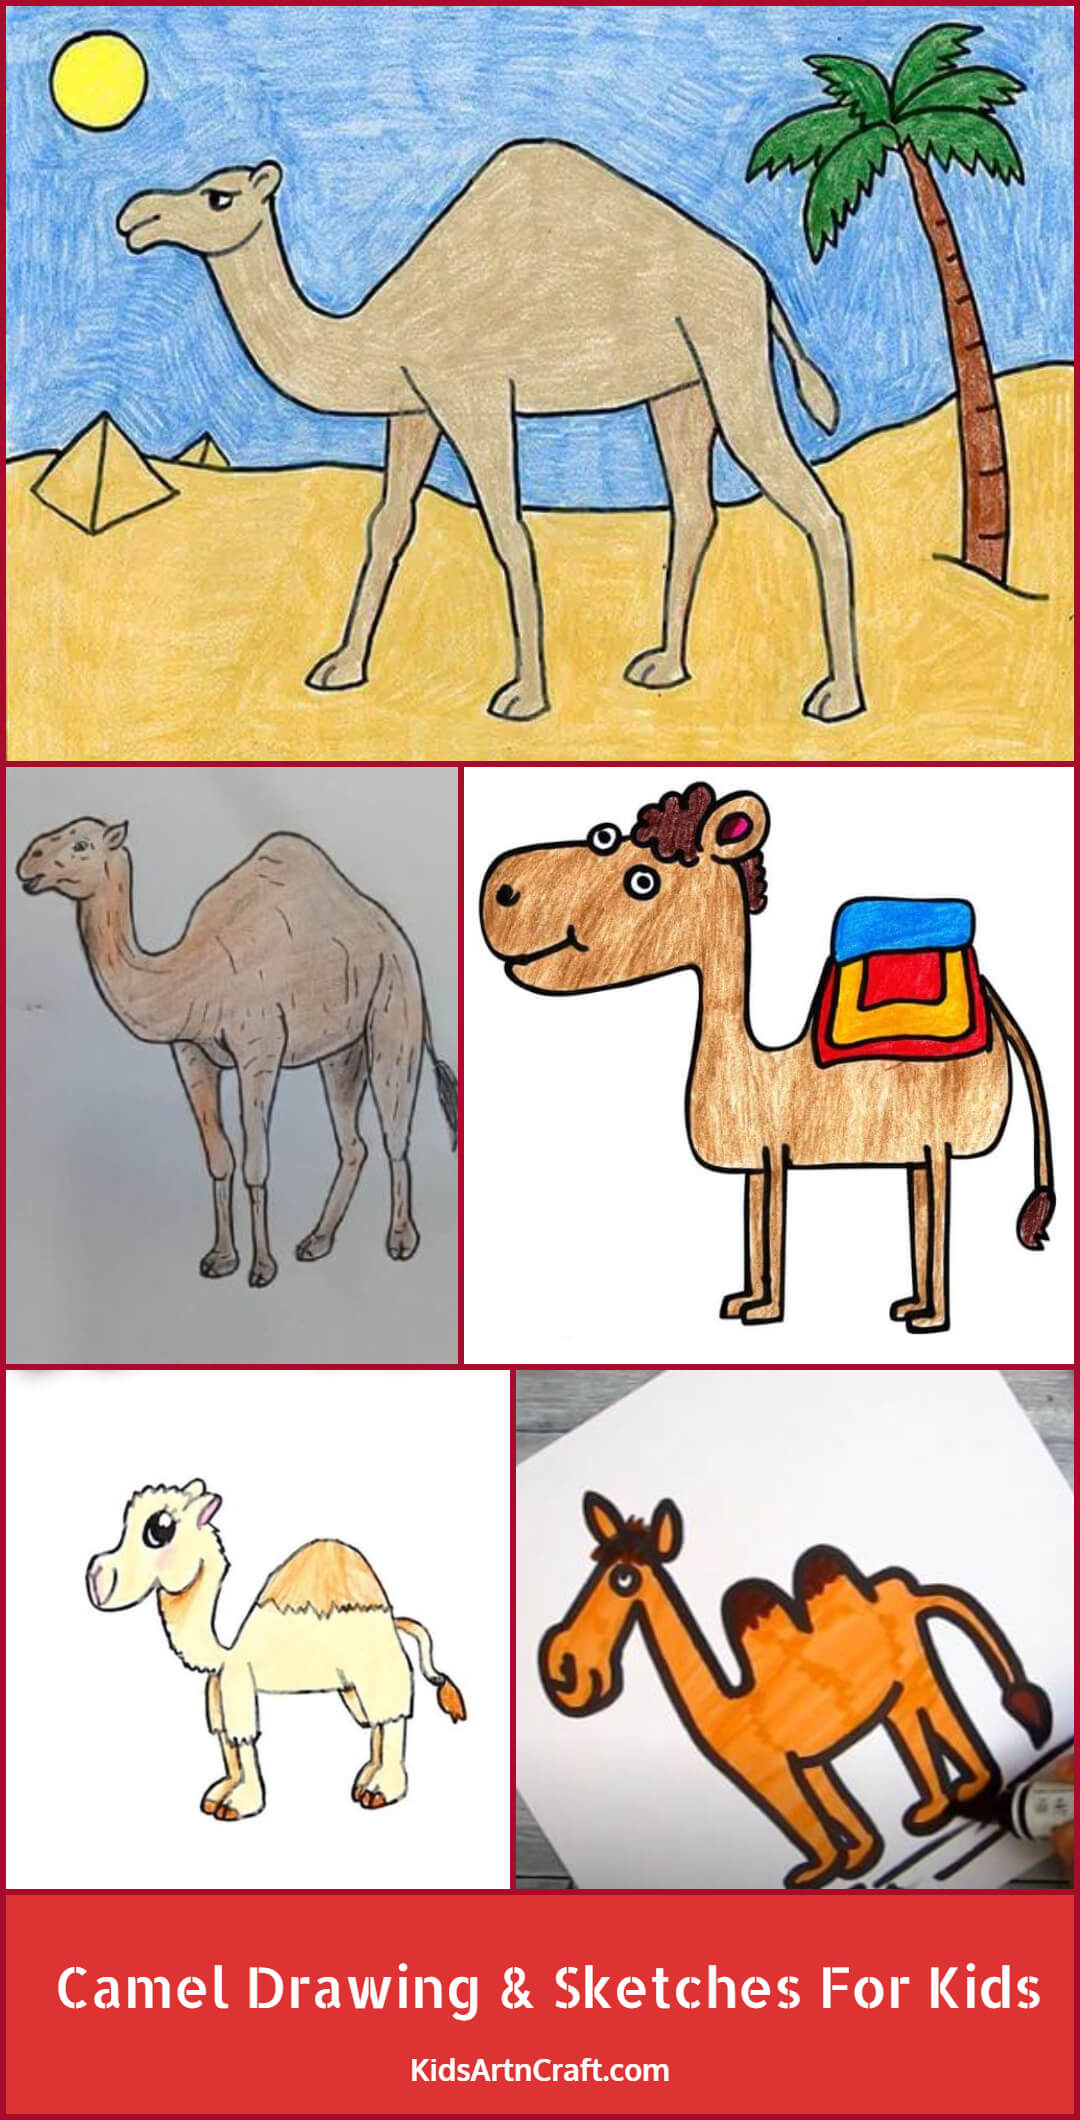 Camel Drawing & Sketches for Kids